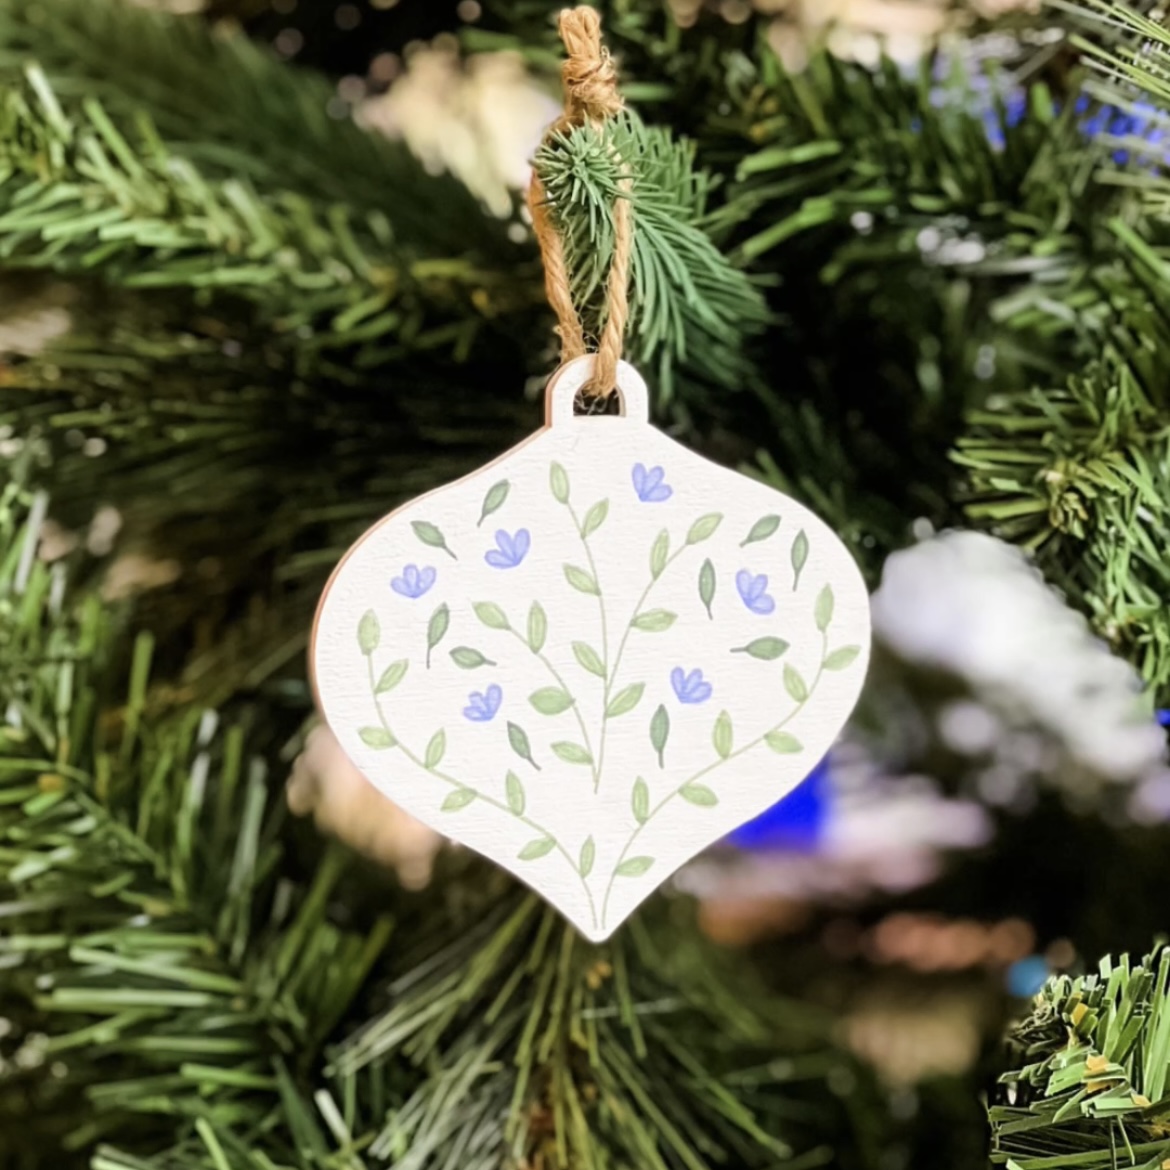 DIY Ornaments with Dual Brush Pens by Jessica Mack on behalf of Tombow